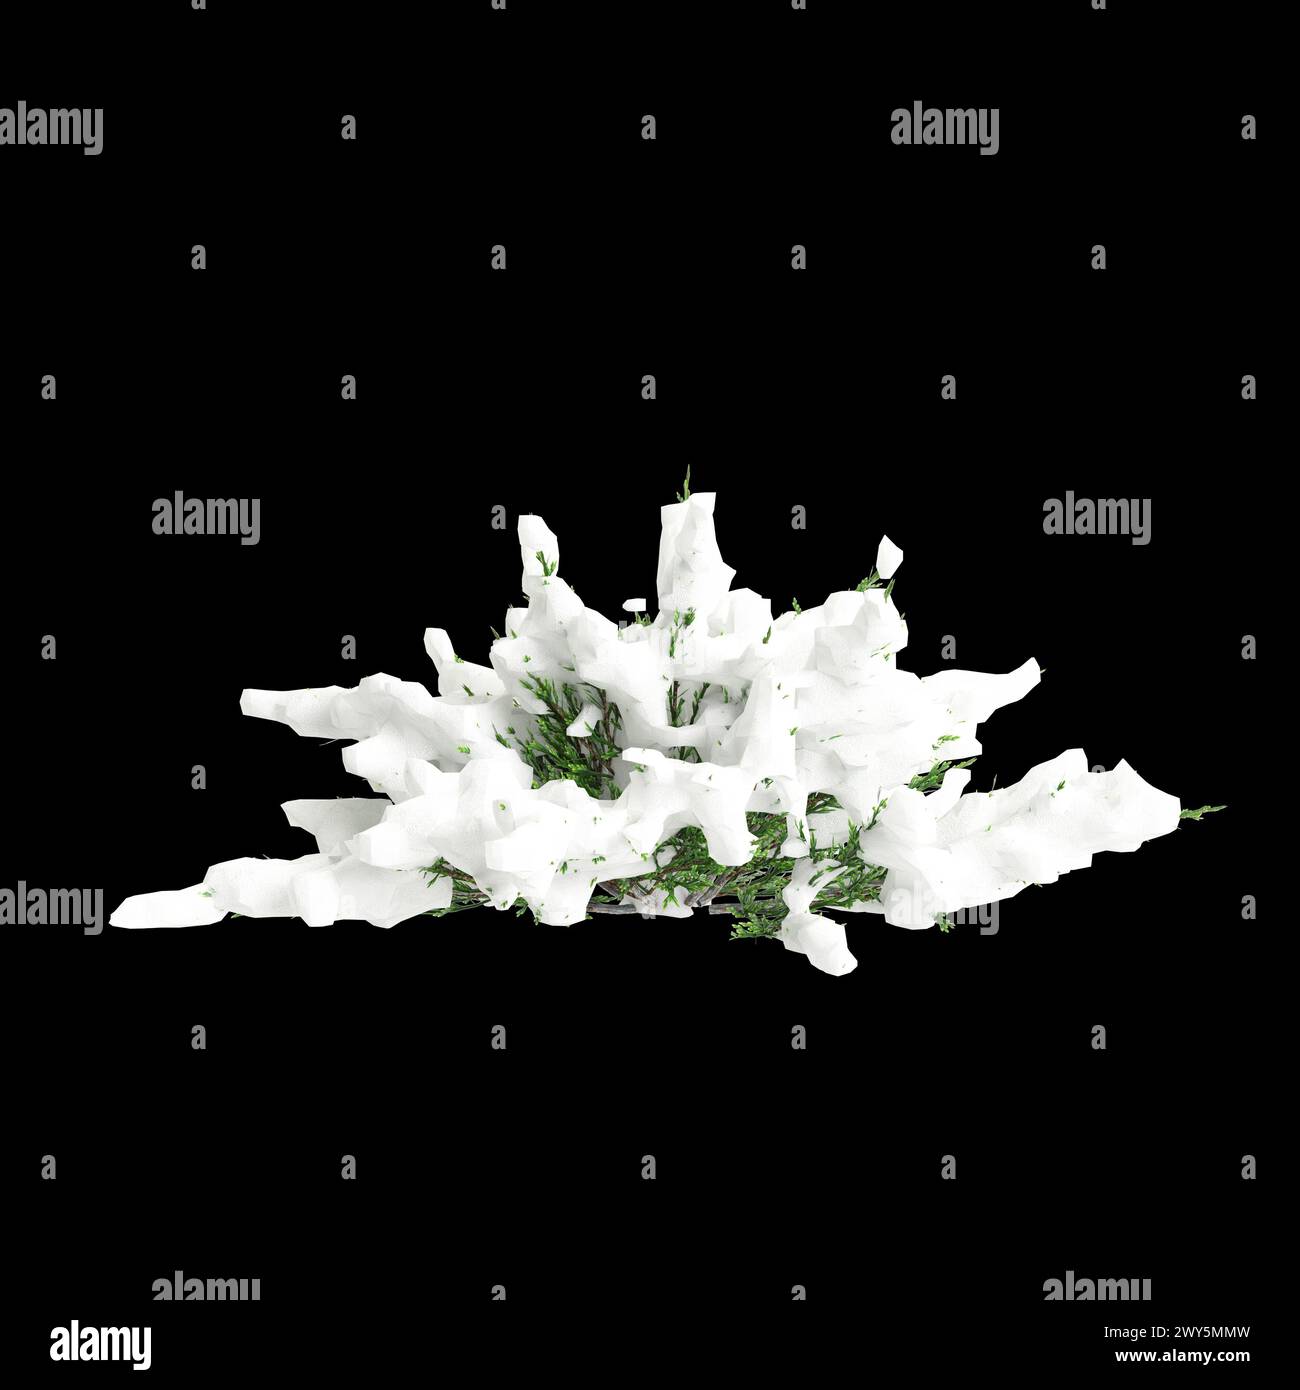 3d illustration of Juniperus sabina snow covered tree isolated on black background Stock Photo